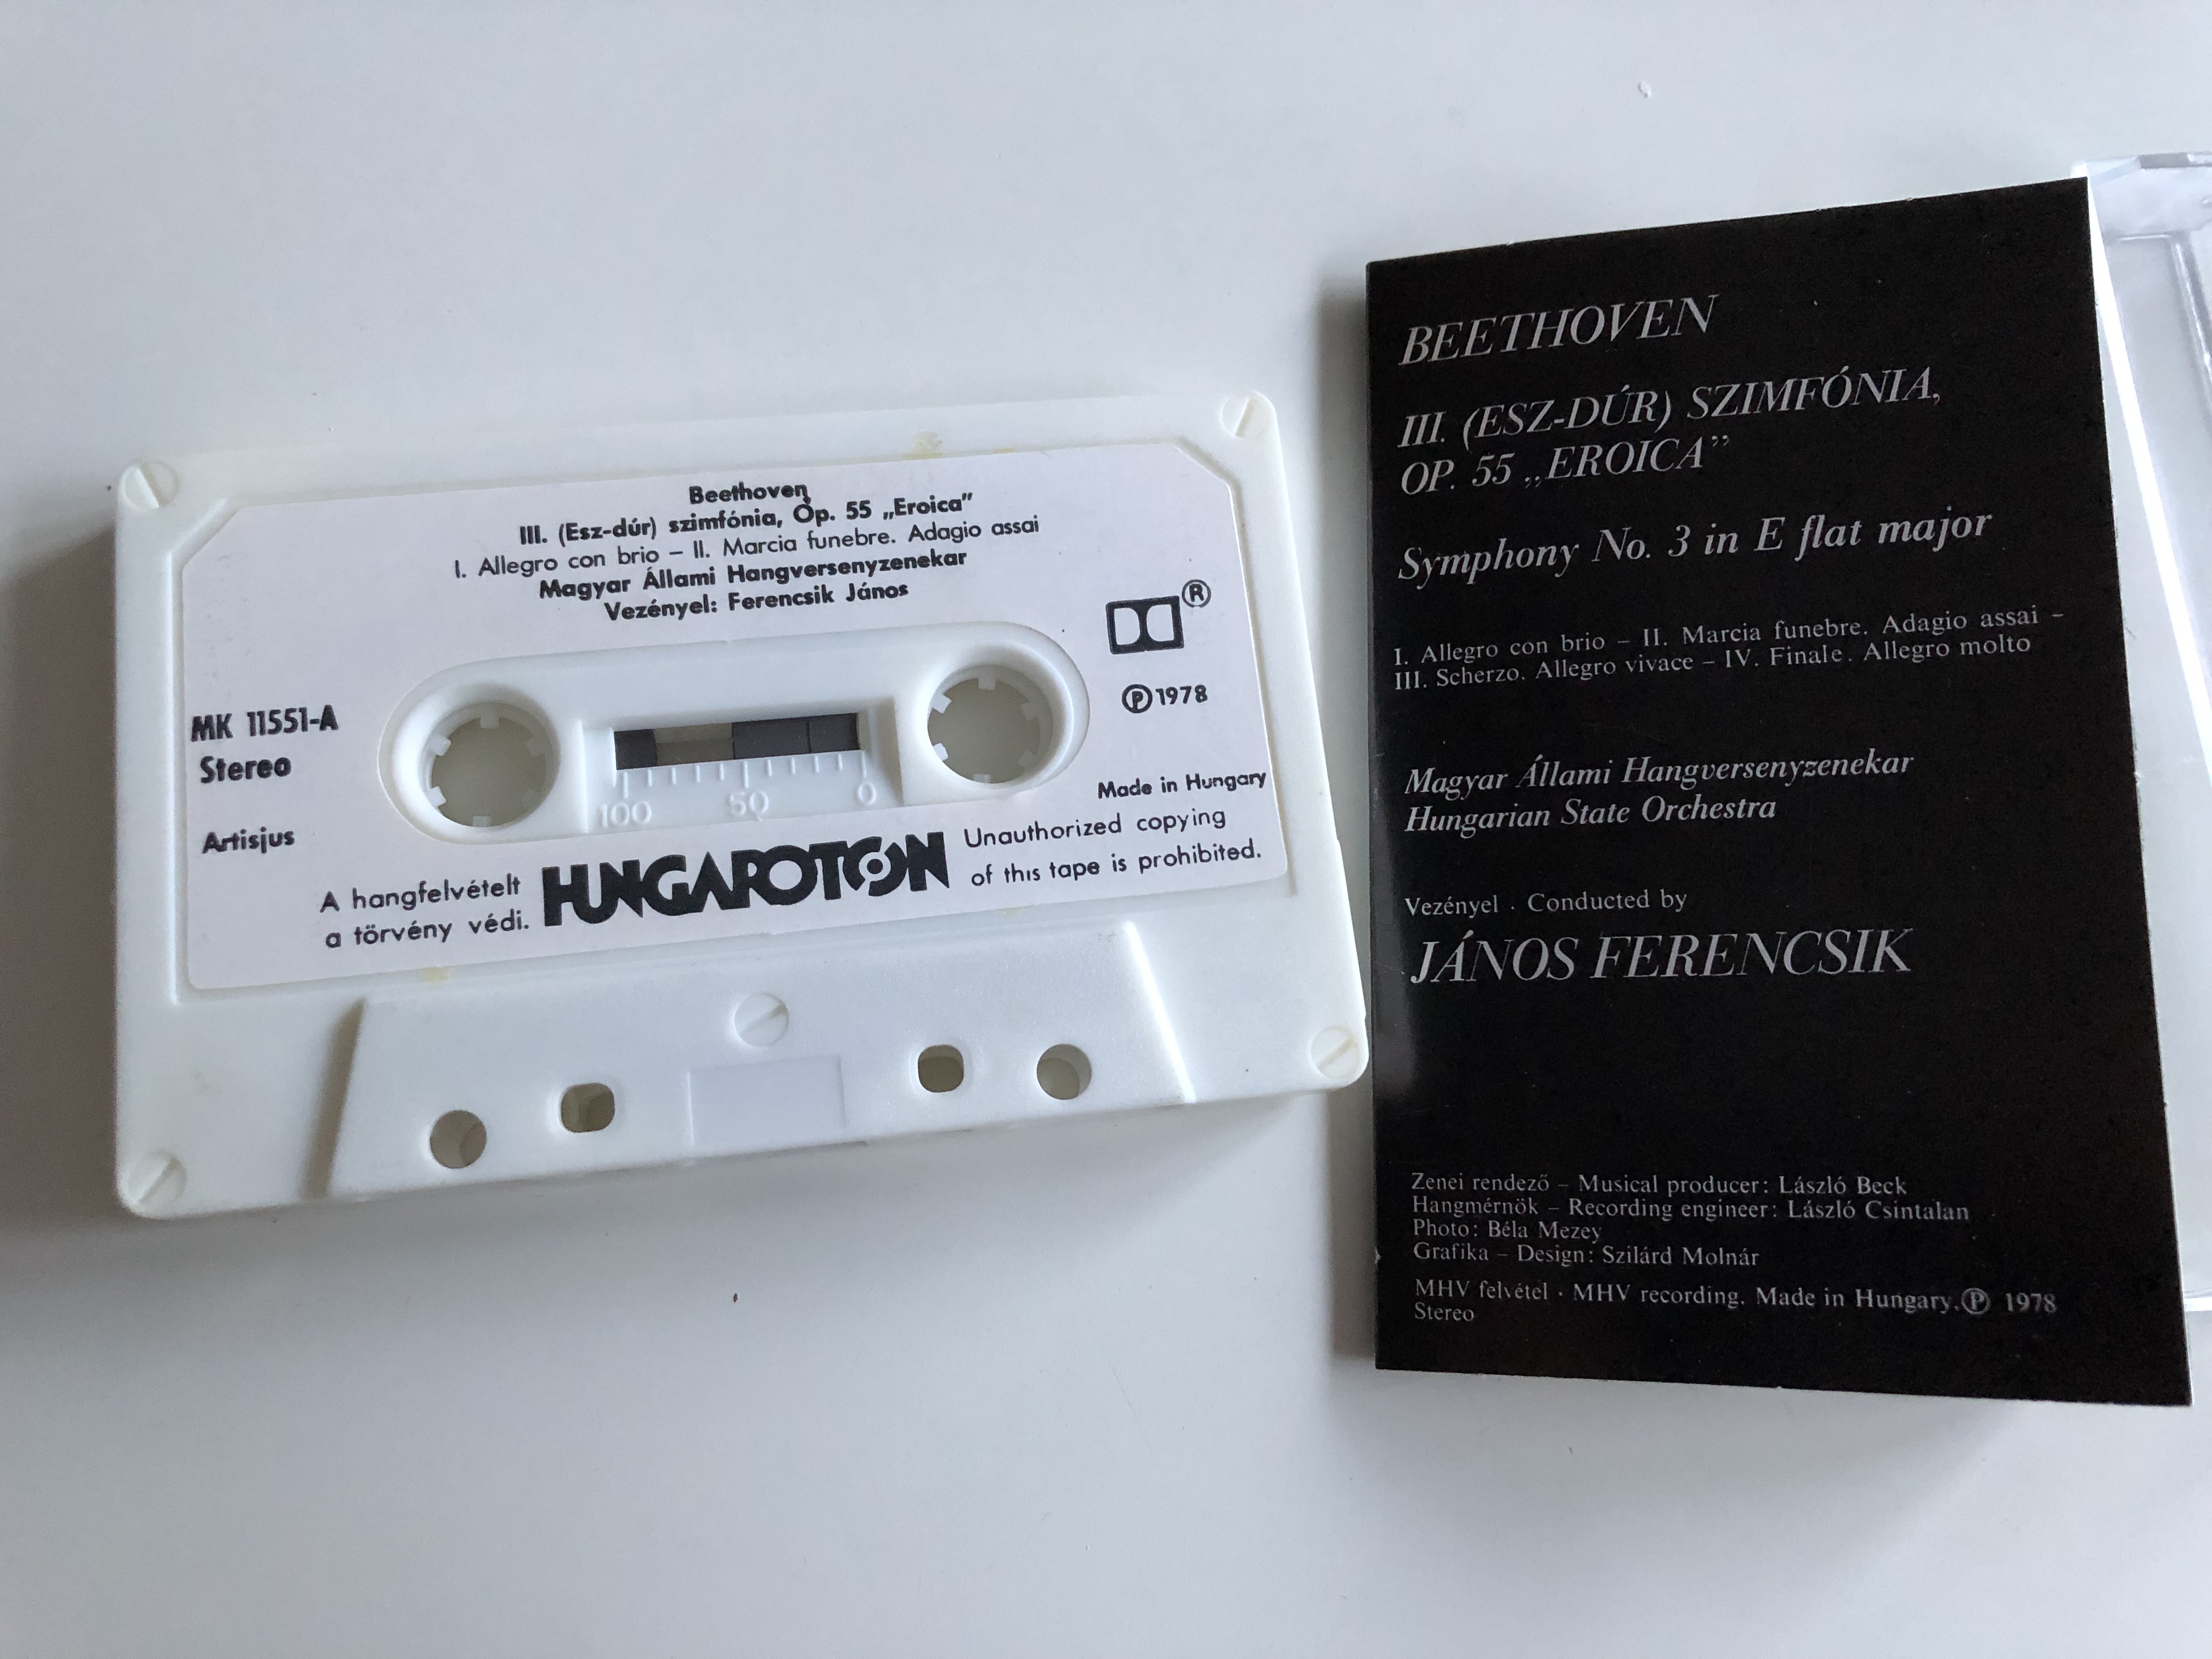 eroica-beethoven-hungarian-state-orchestra-conducted-j-nos-ferencsik-hungaroton-cassette-stereo-mk-11551-4-.jpg